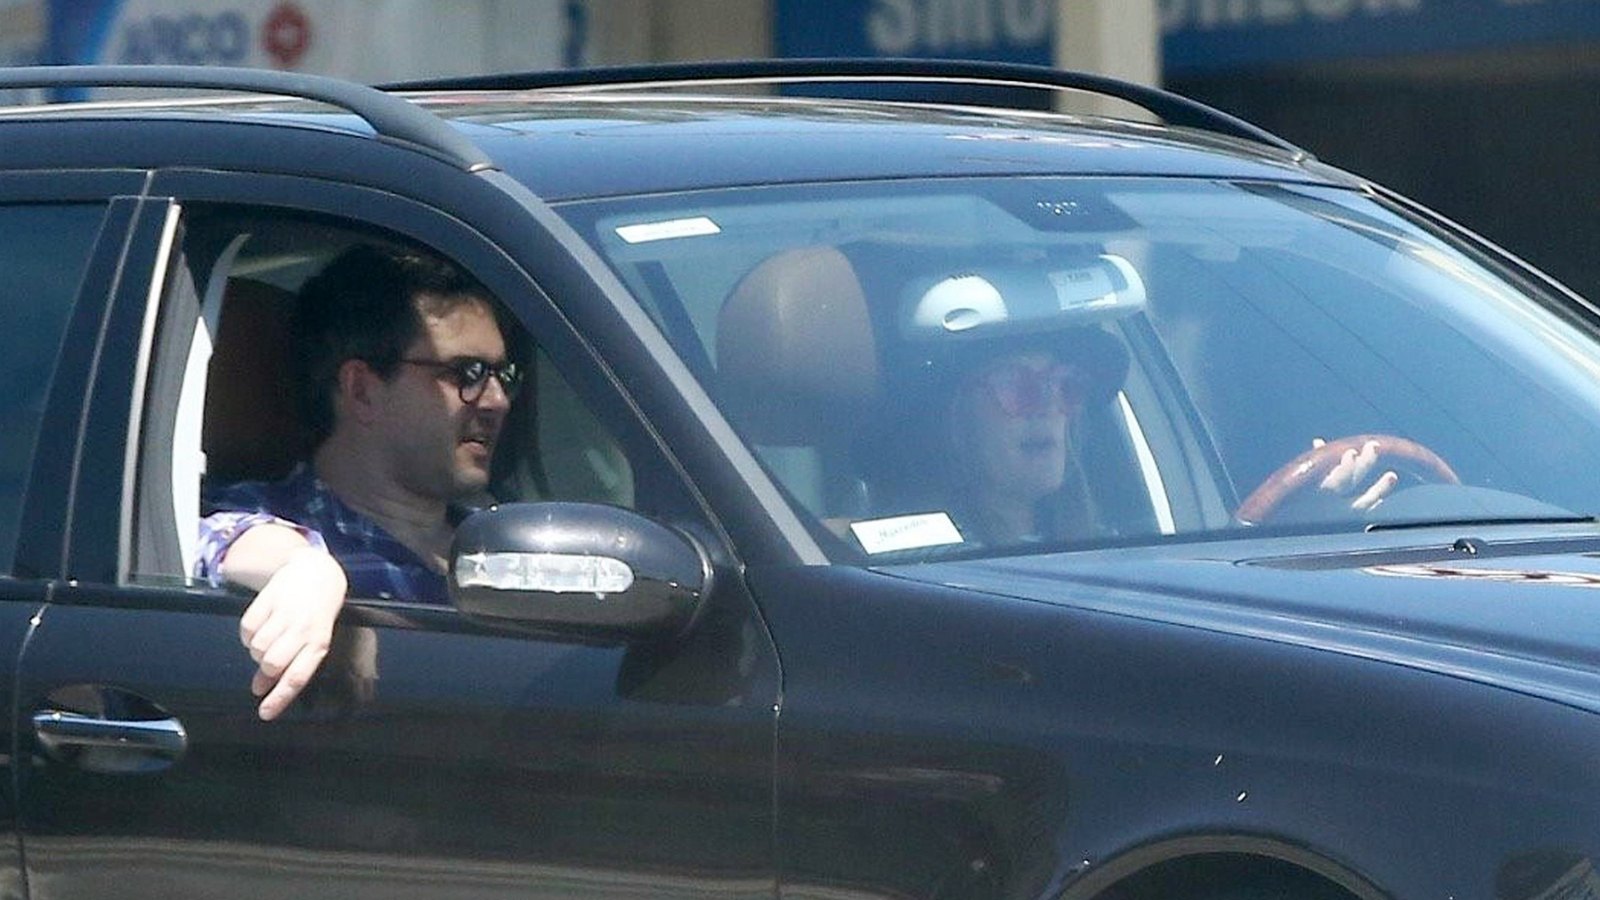 Drew Barrymore was seen driving back home after having lunch with new boyfriend David Hutchinson in West Hollywood.